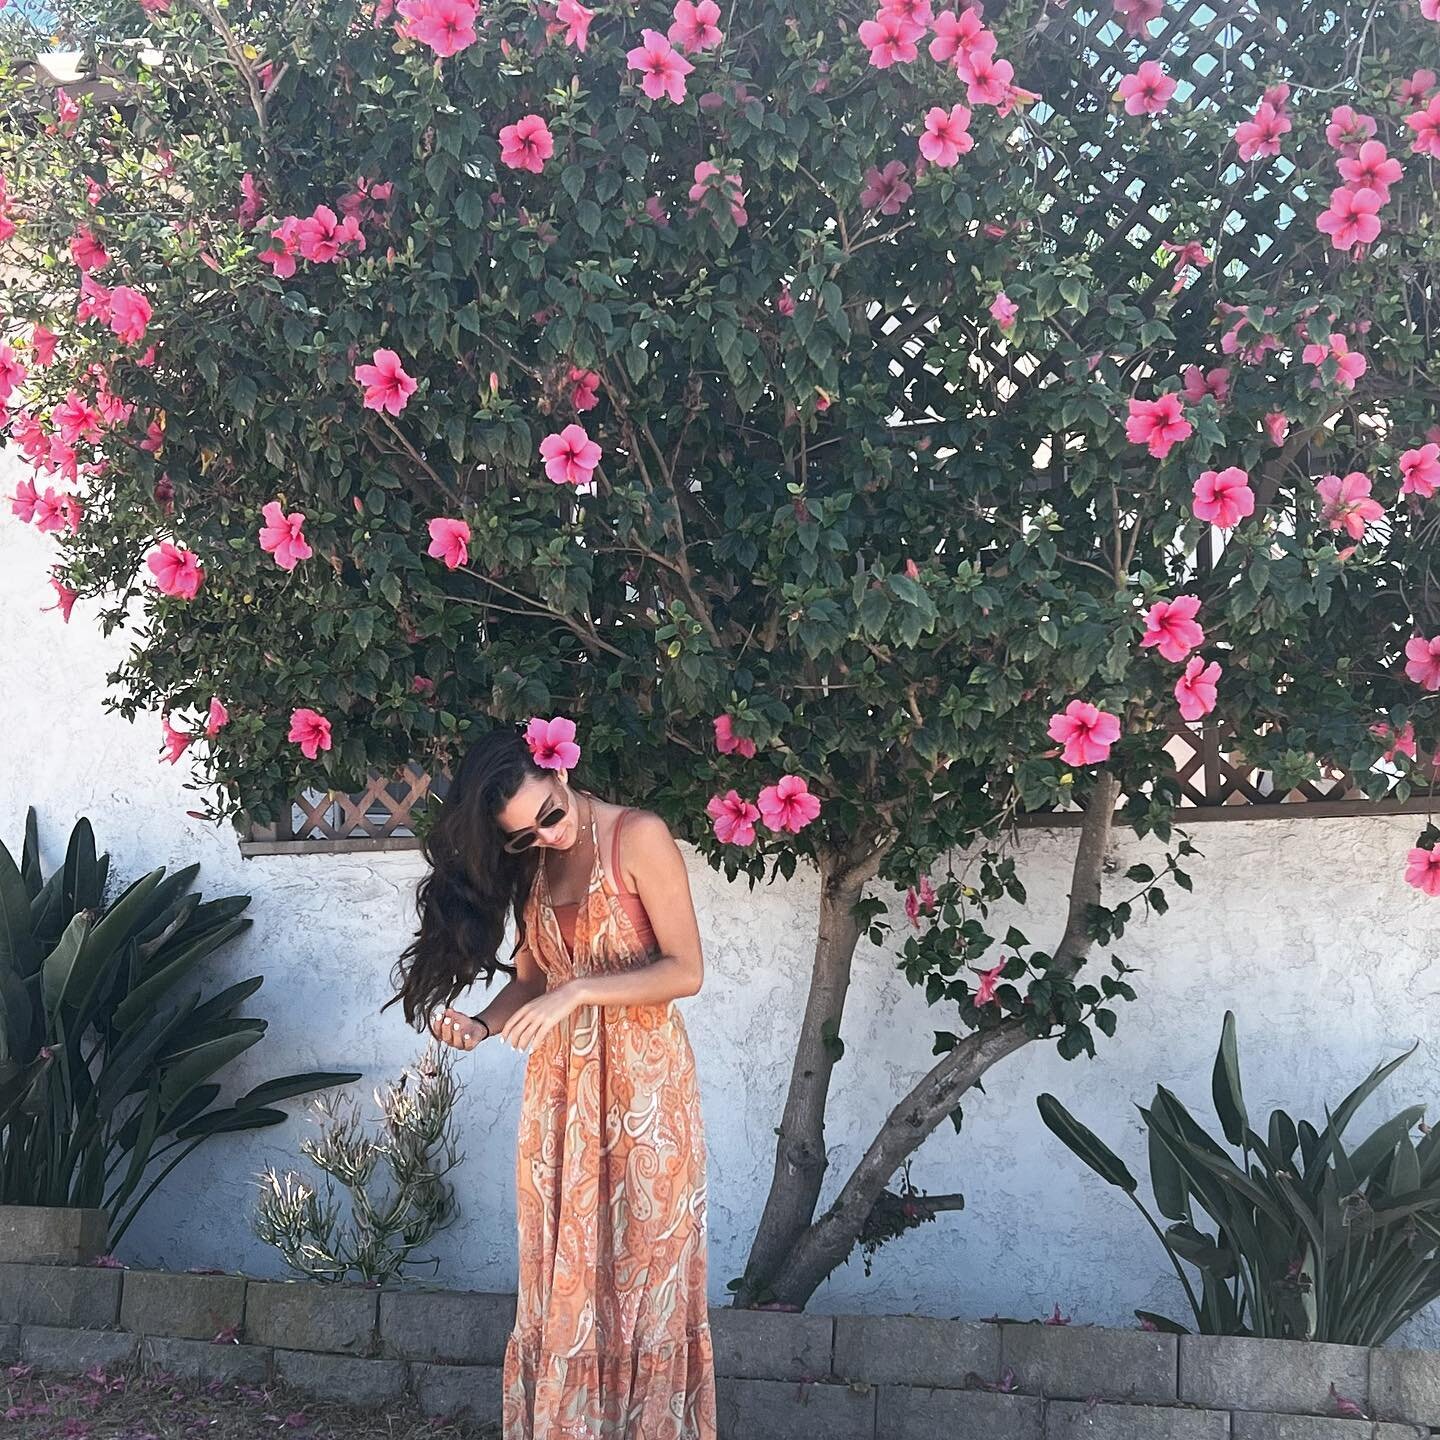 🌸29🌸 I spent my birthday this year exploring LA &amp; part of the coast of Cali with my love 💓 it&rsquo;s been so fun playing in the normal world again after 7 months immersed in the desert as I&rsquo;ve been waiting for my Mexican visa to be appr